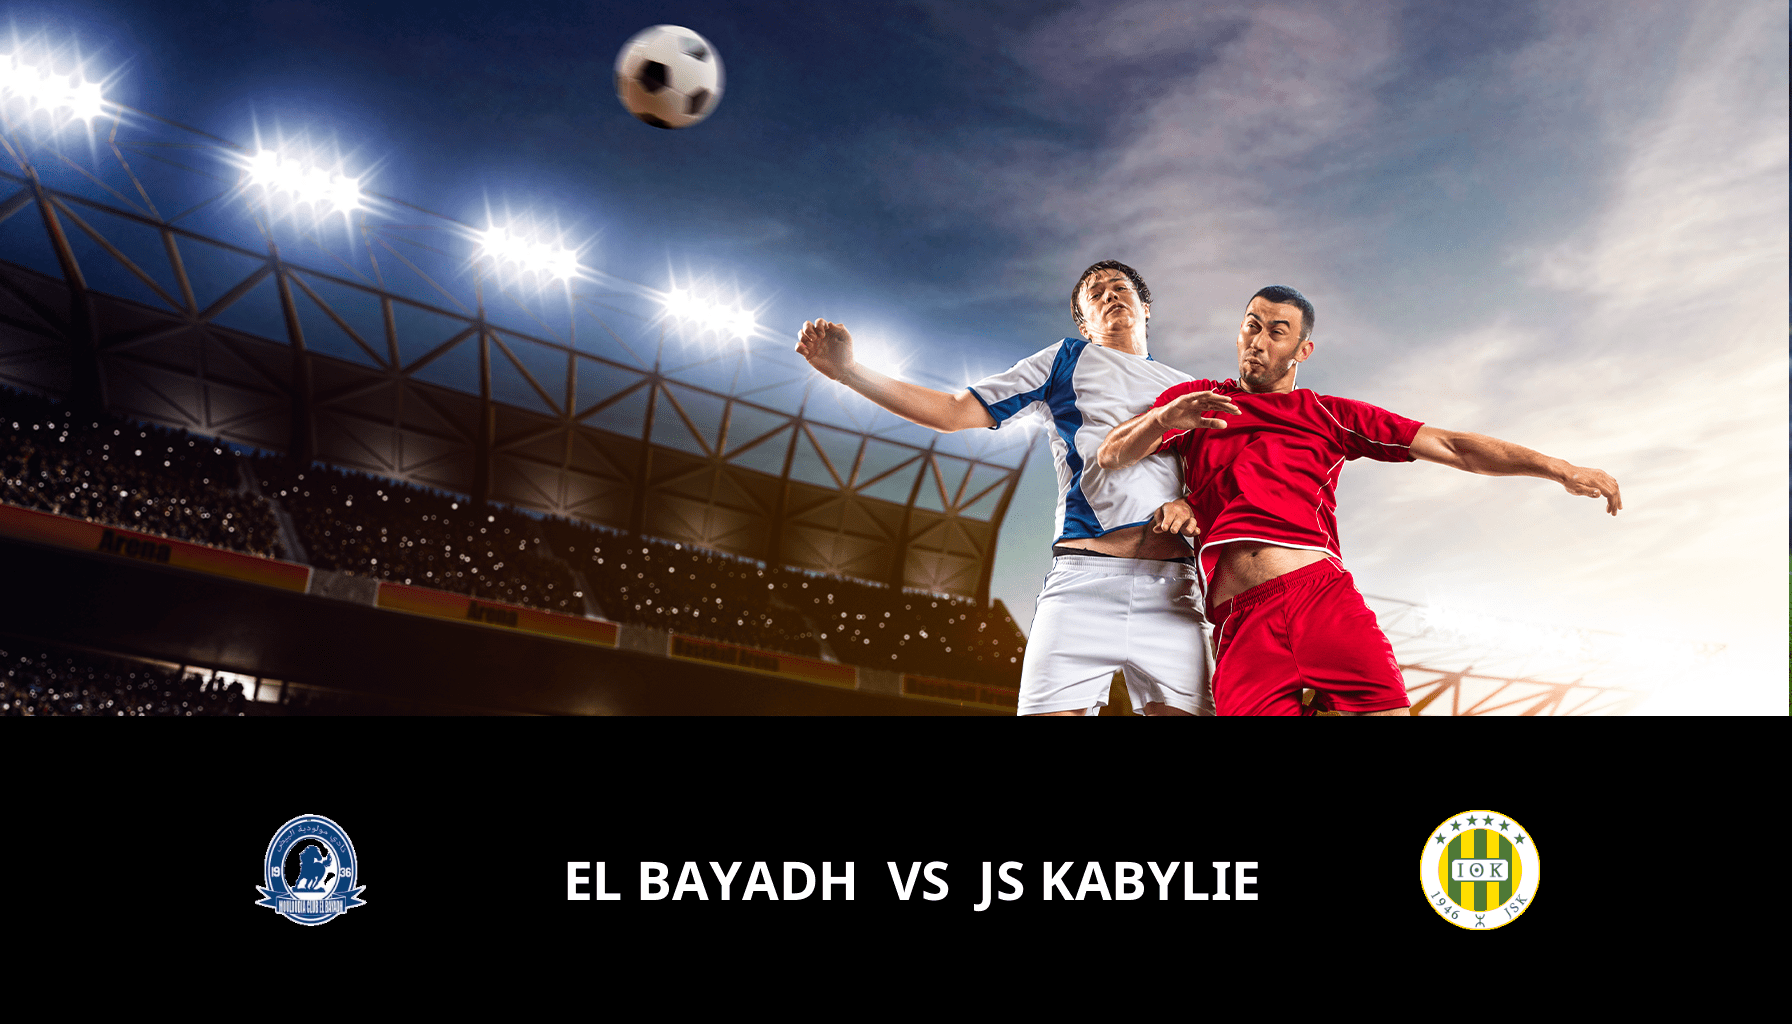 Previsione per El Bayadh VS JS Kabylie il 17/05/2024 Analysis of the match